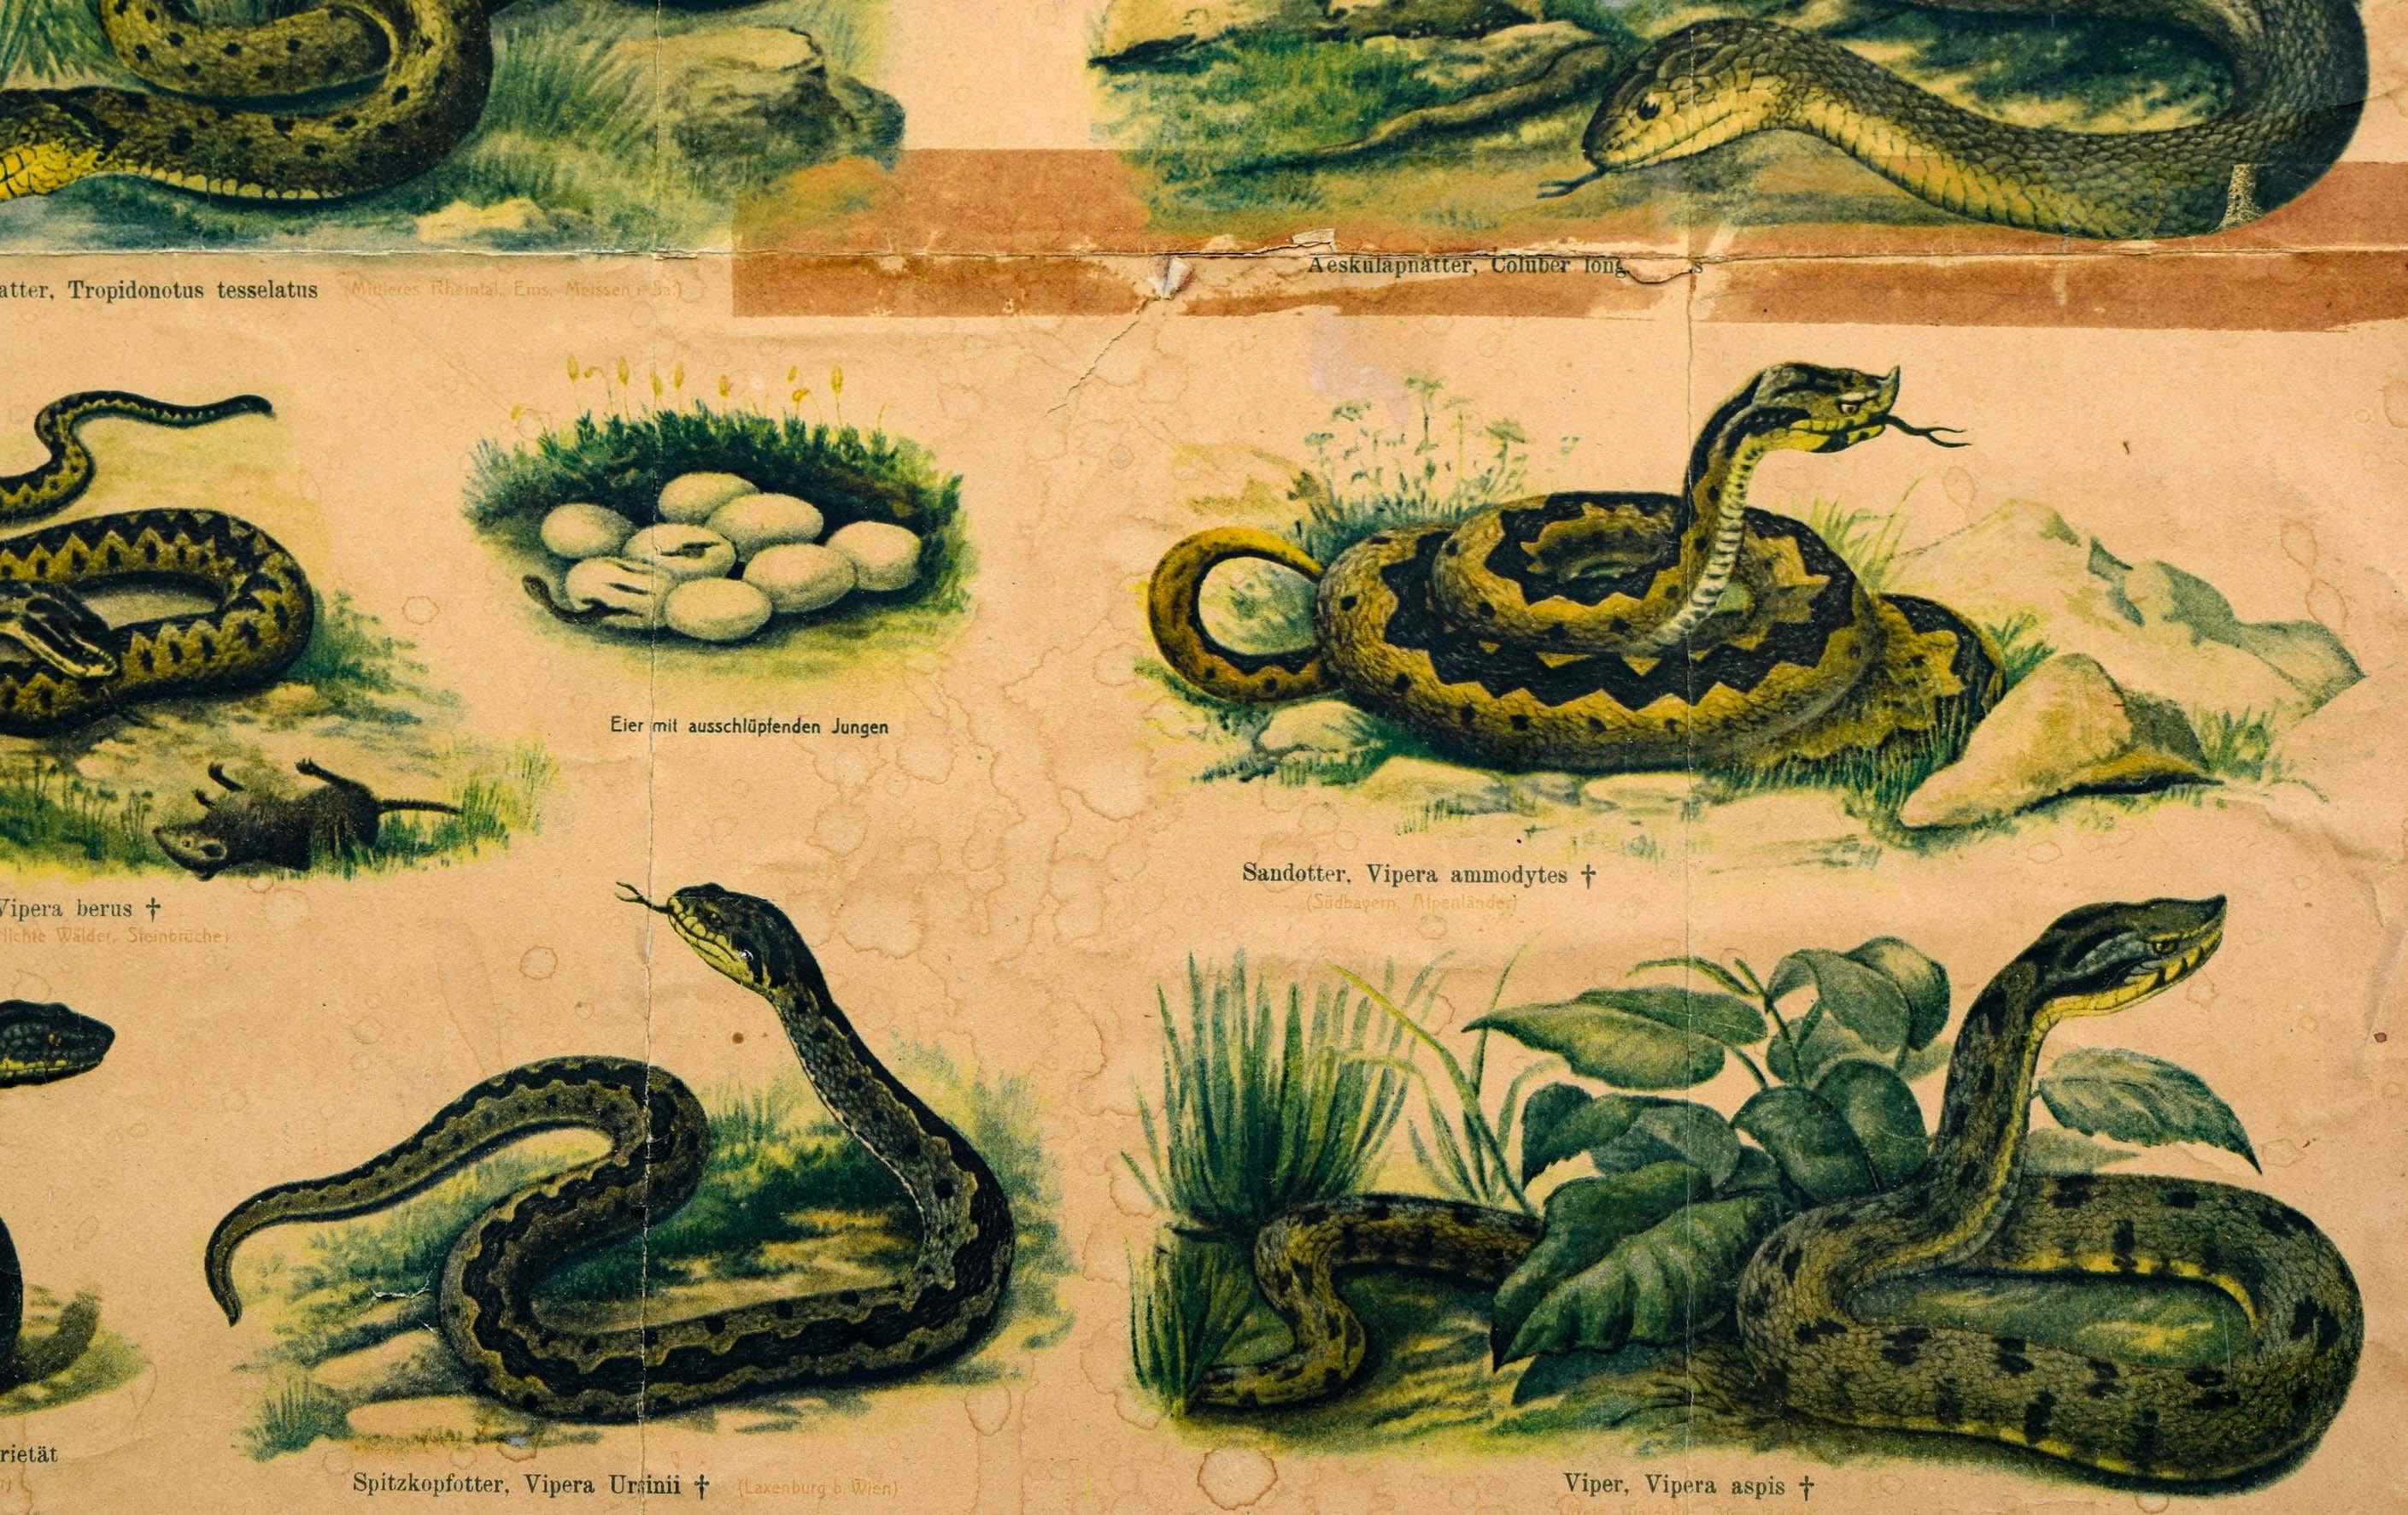 This antique vintage wall chart shows different species of reptiles and amphibians, which are native in Austria and Germany. You can see different types of toads, snakes, newts and salamanders. It is part of the scientific and agricultural tables by